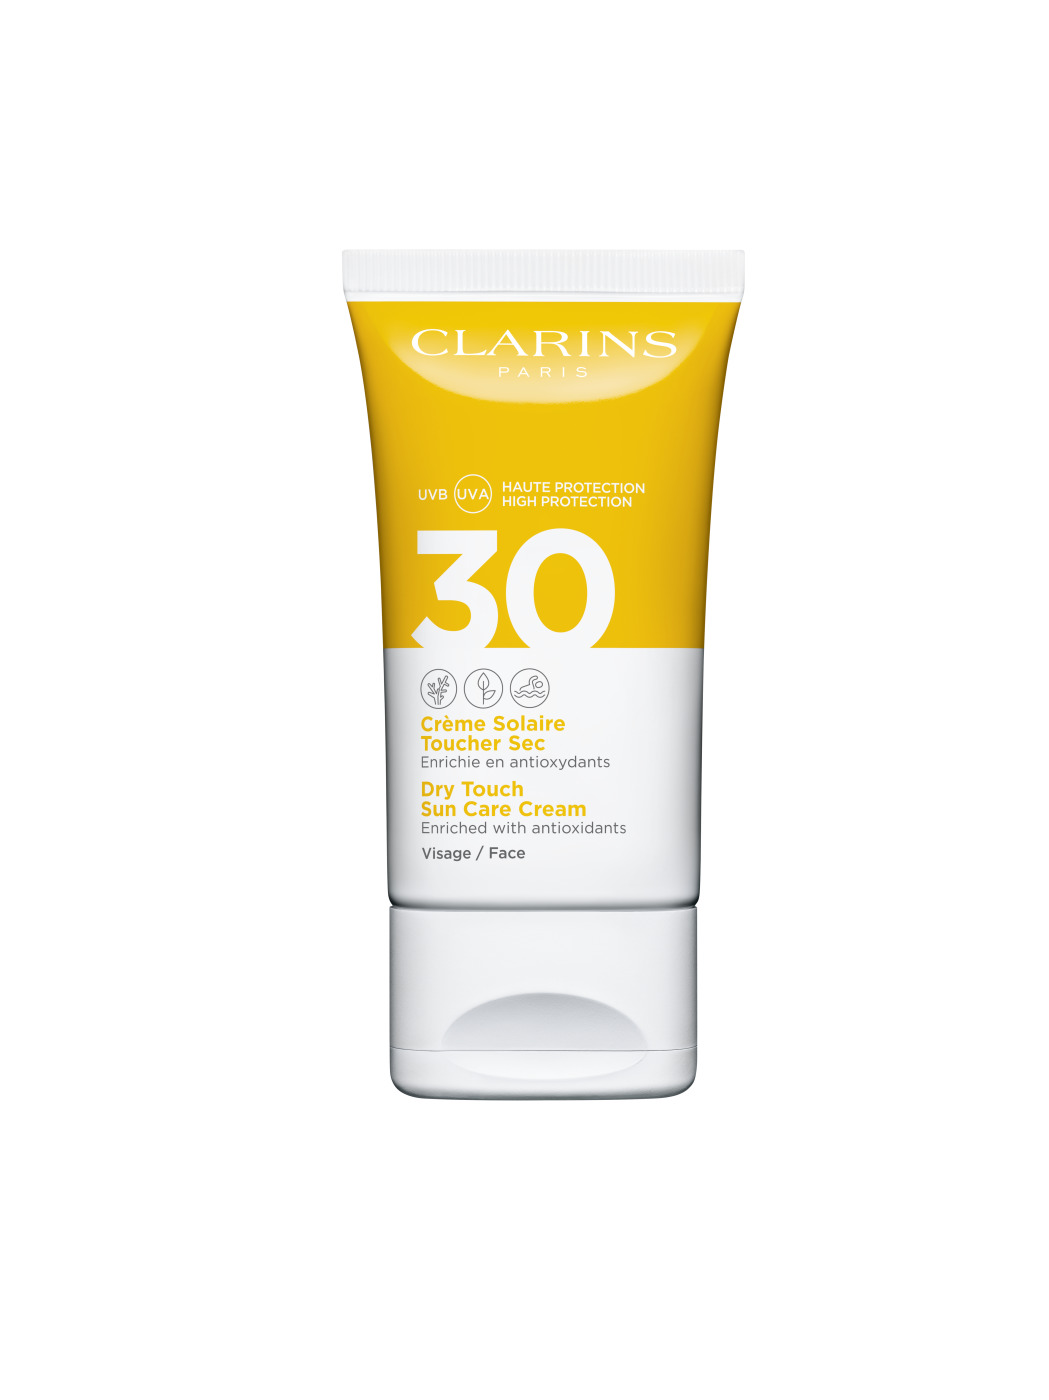 Clarins Dry Touch Face Suncare UVB UVA 30 or 50